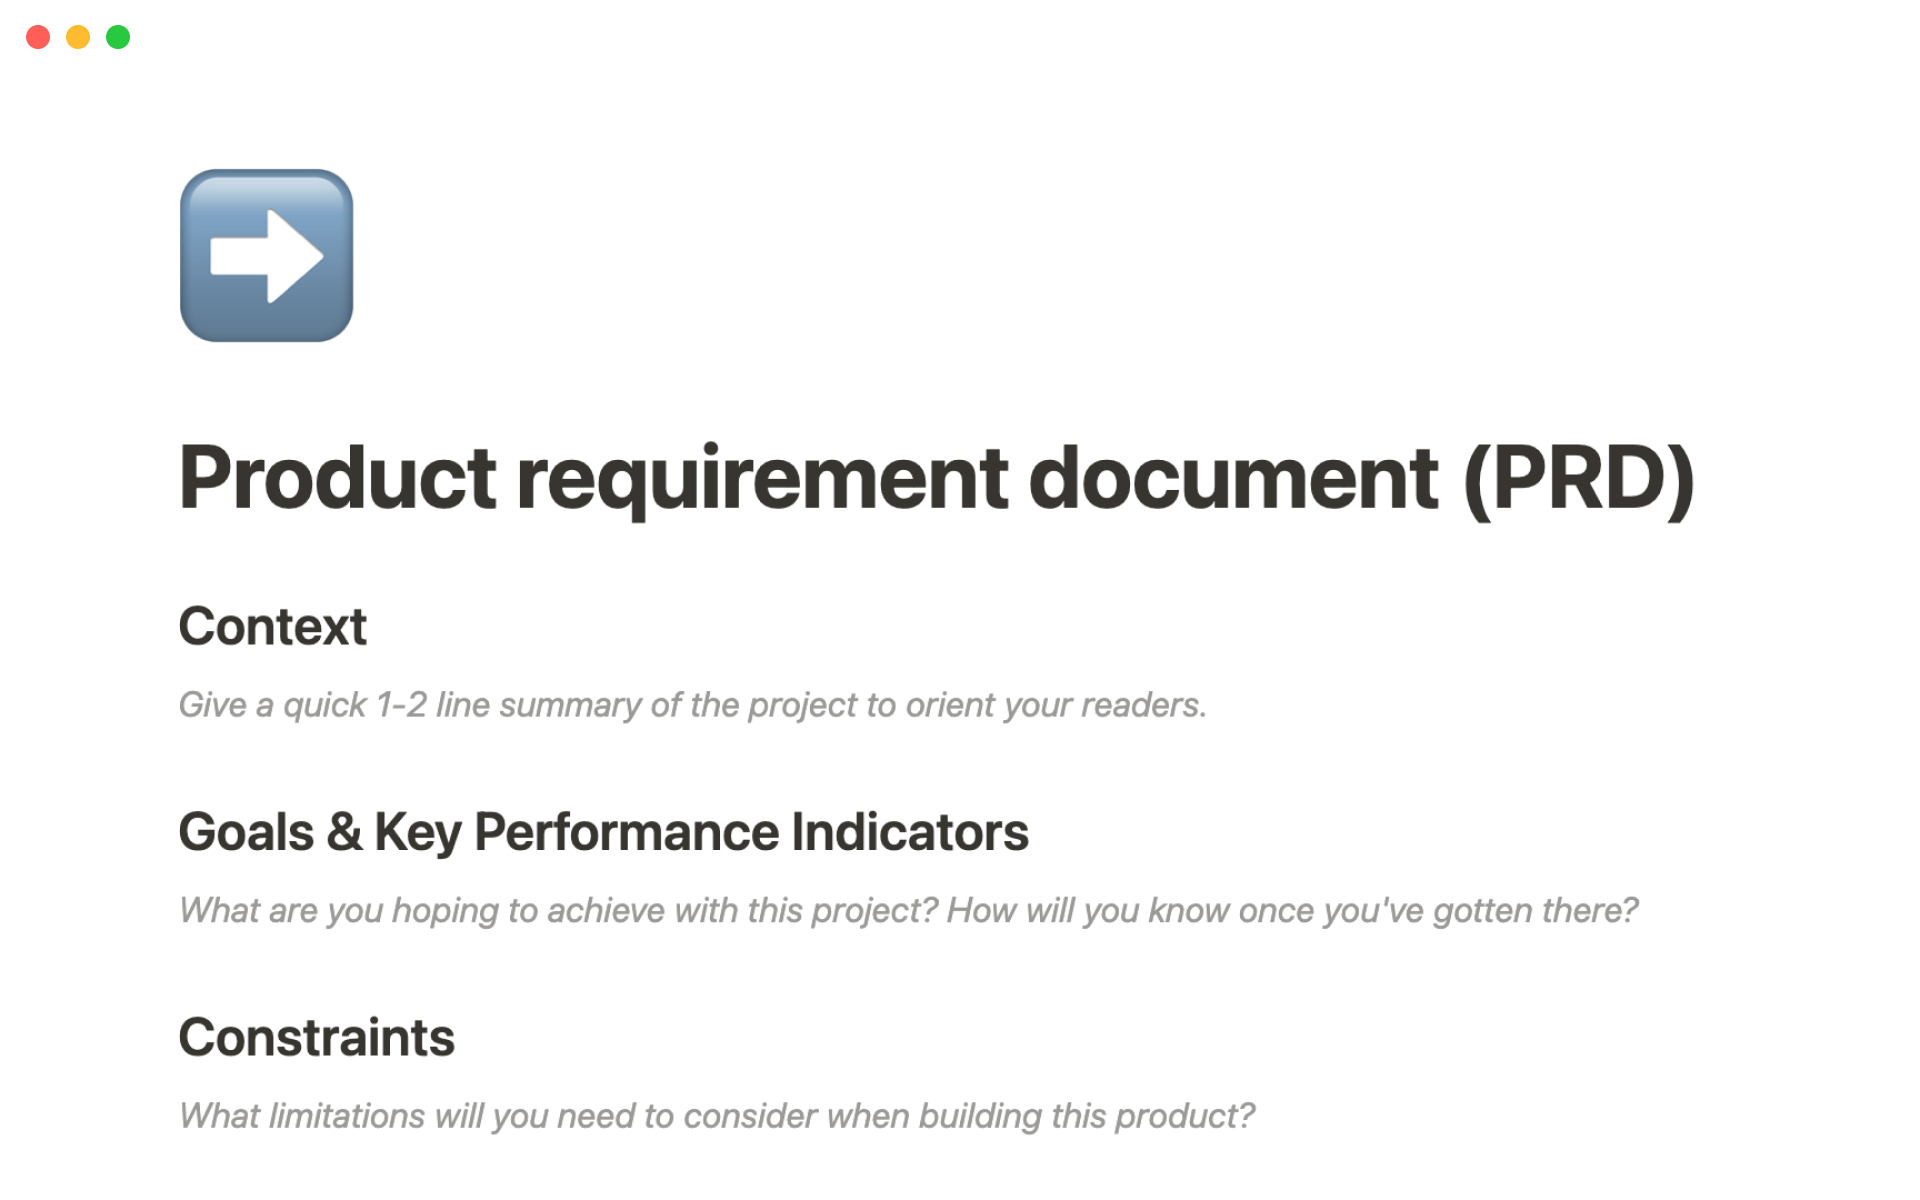 The desktop image for the Product requirement document (PRD) template